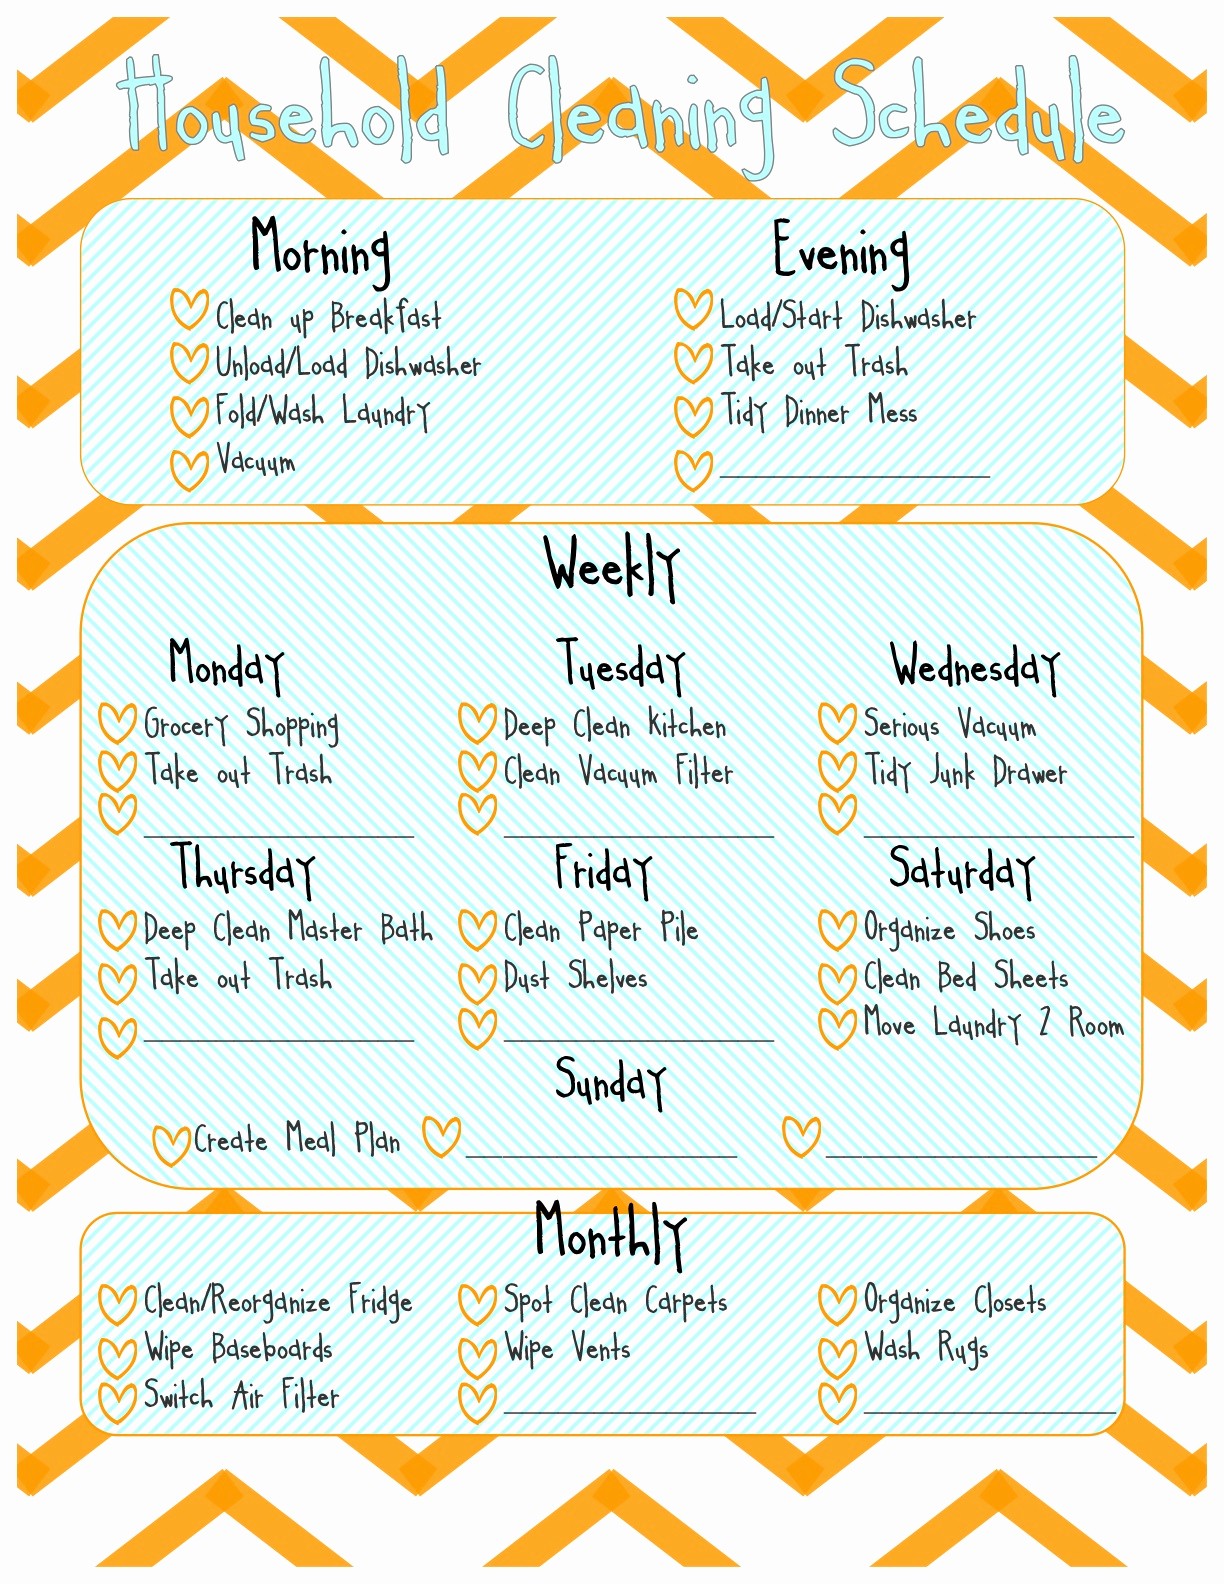 Monthly House Cleaning Schedule Template Unique Sherbert Cafe Printable Home Cleaning Schedule